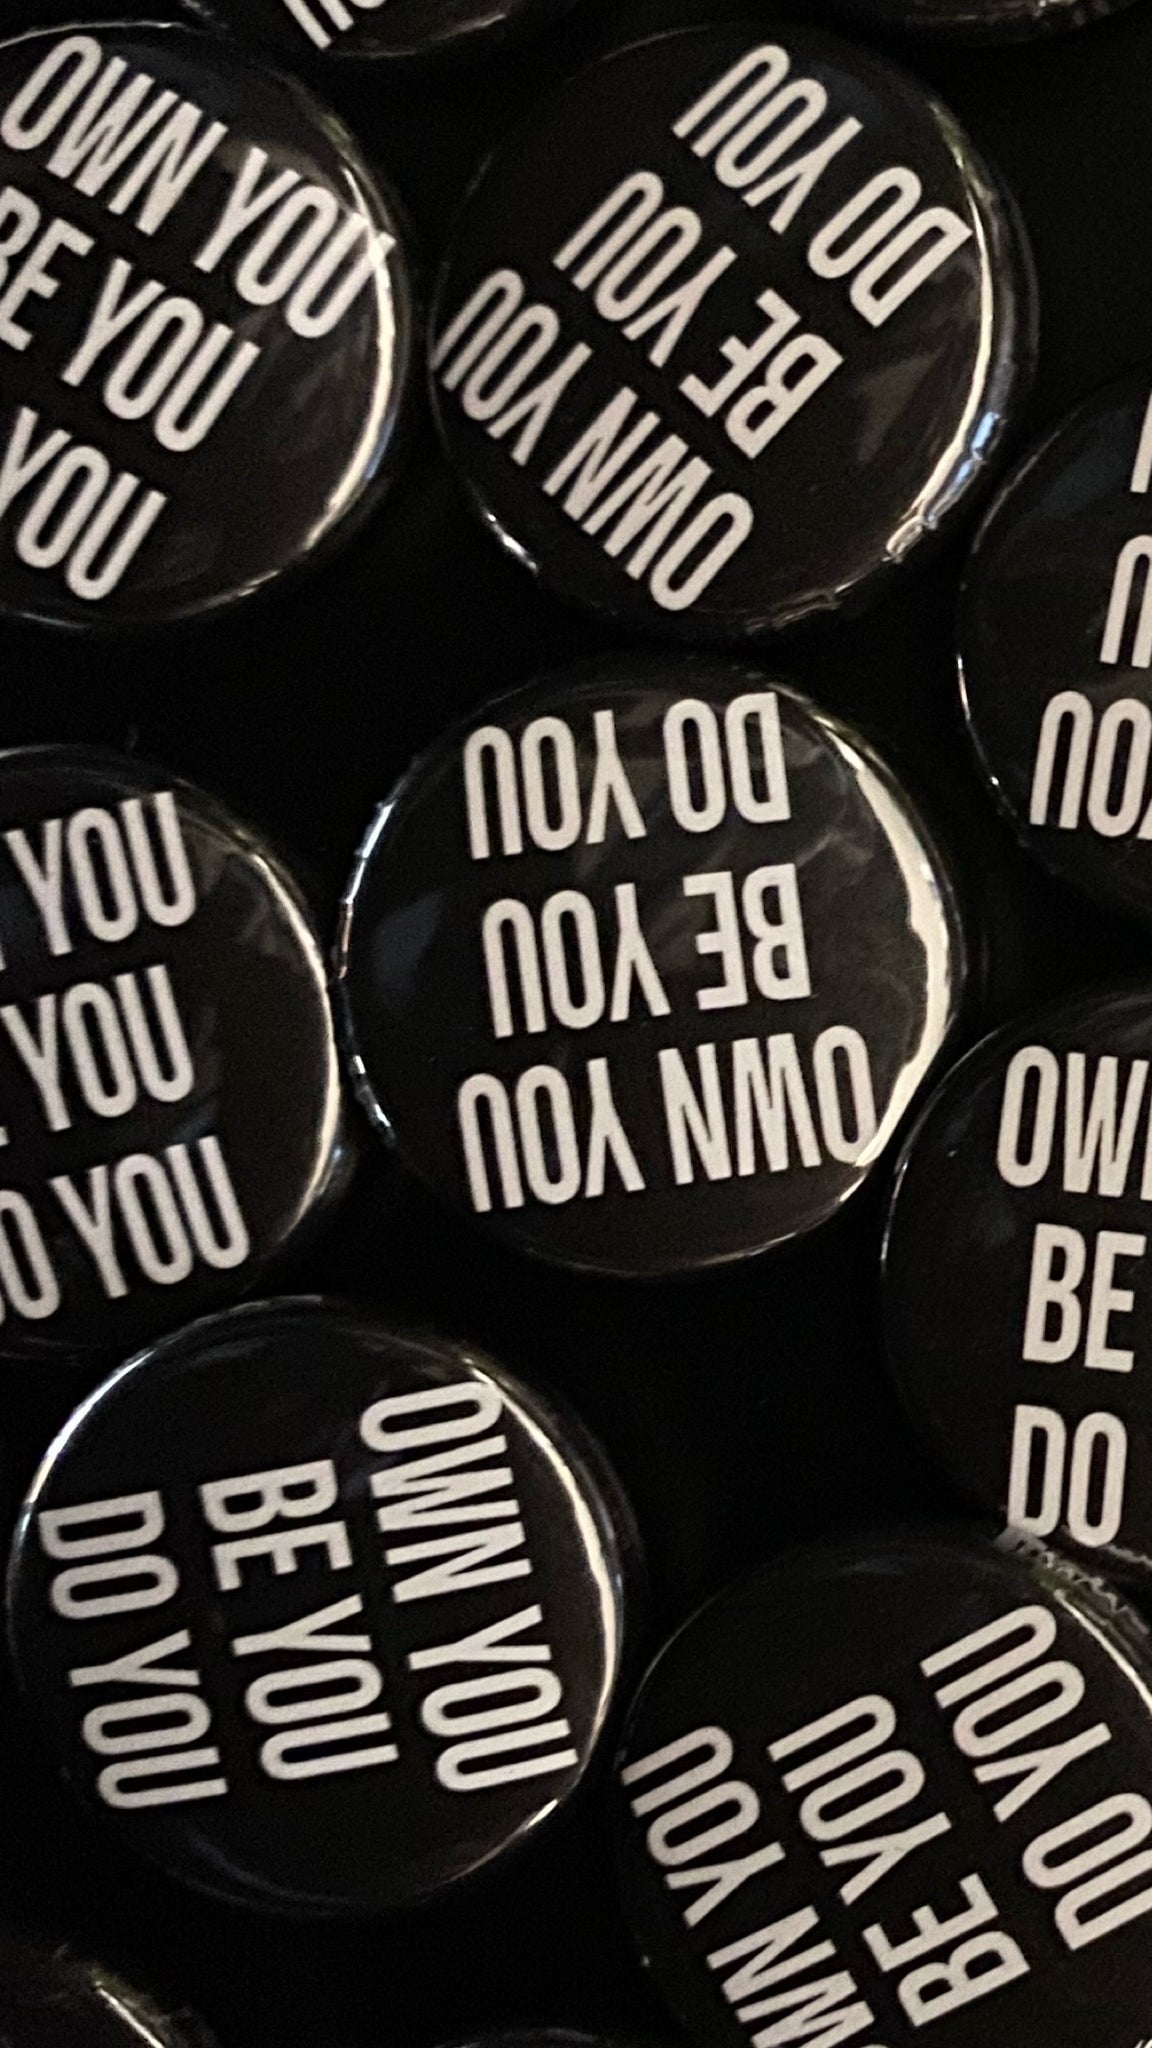 Own You Be You Do You Pin